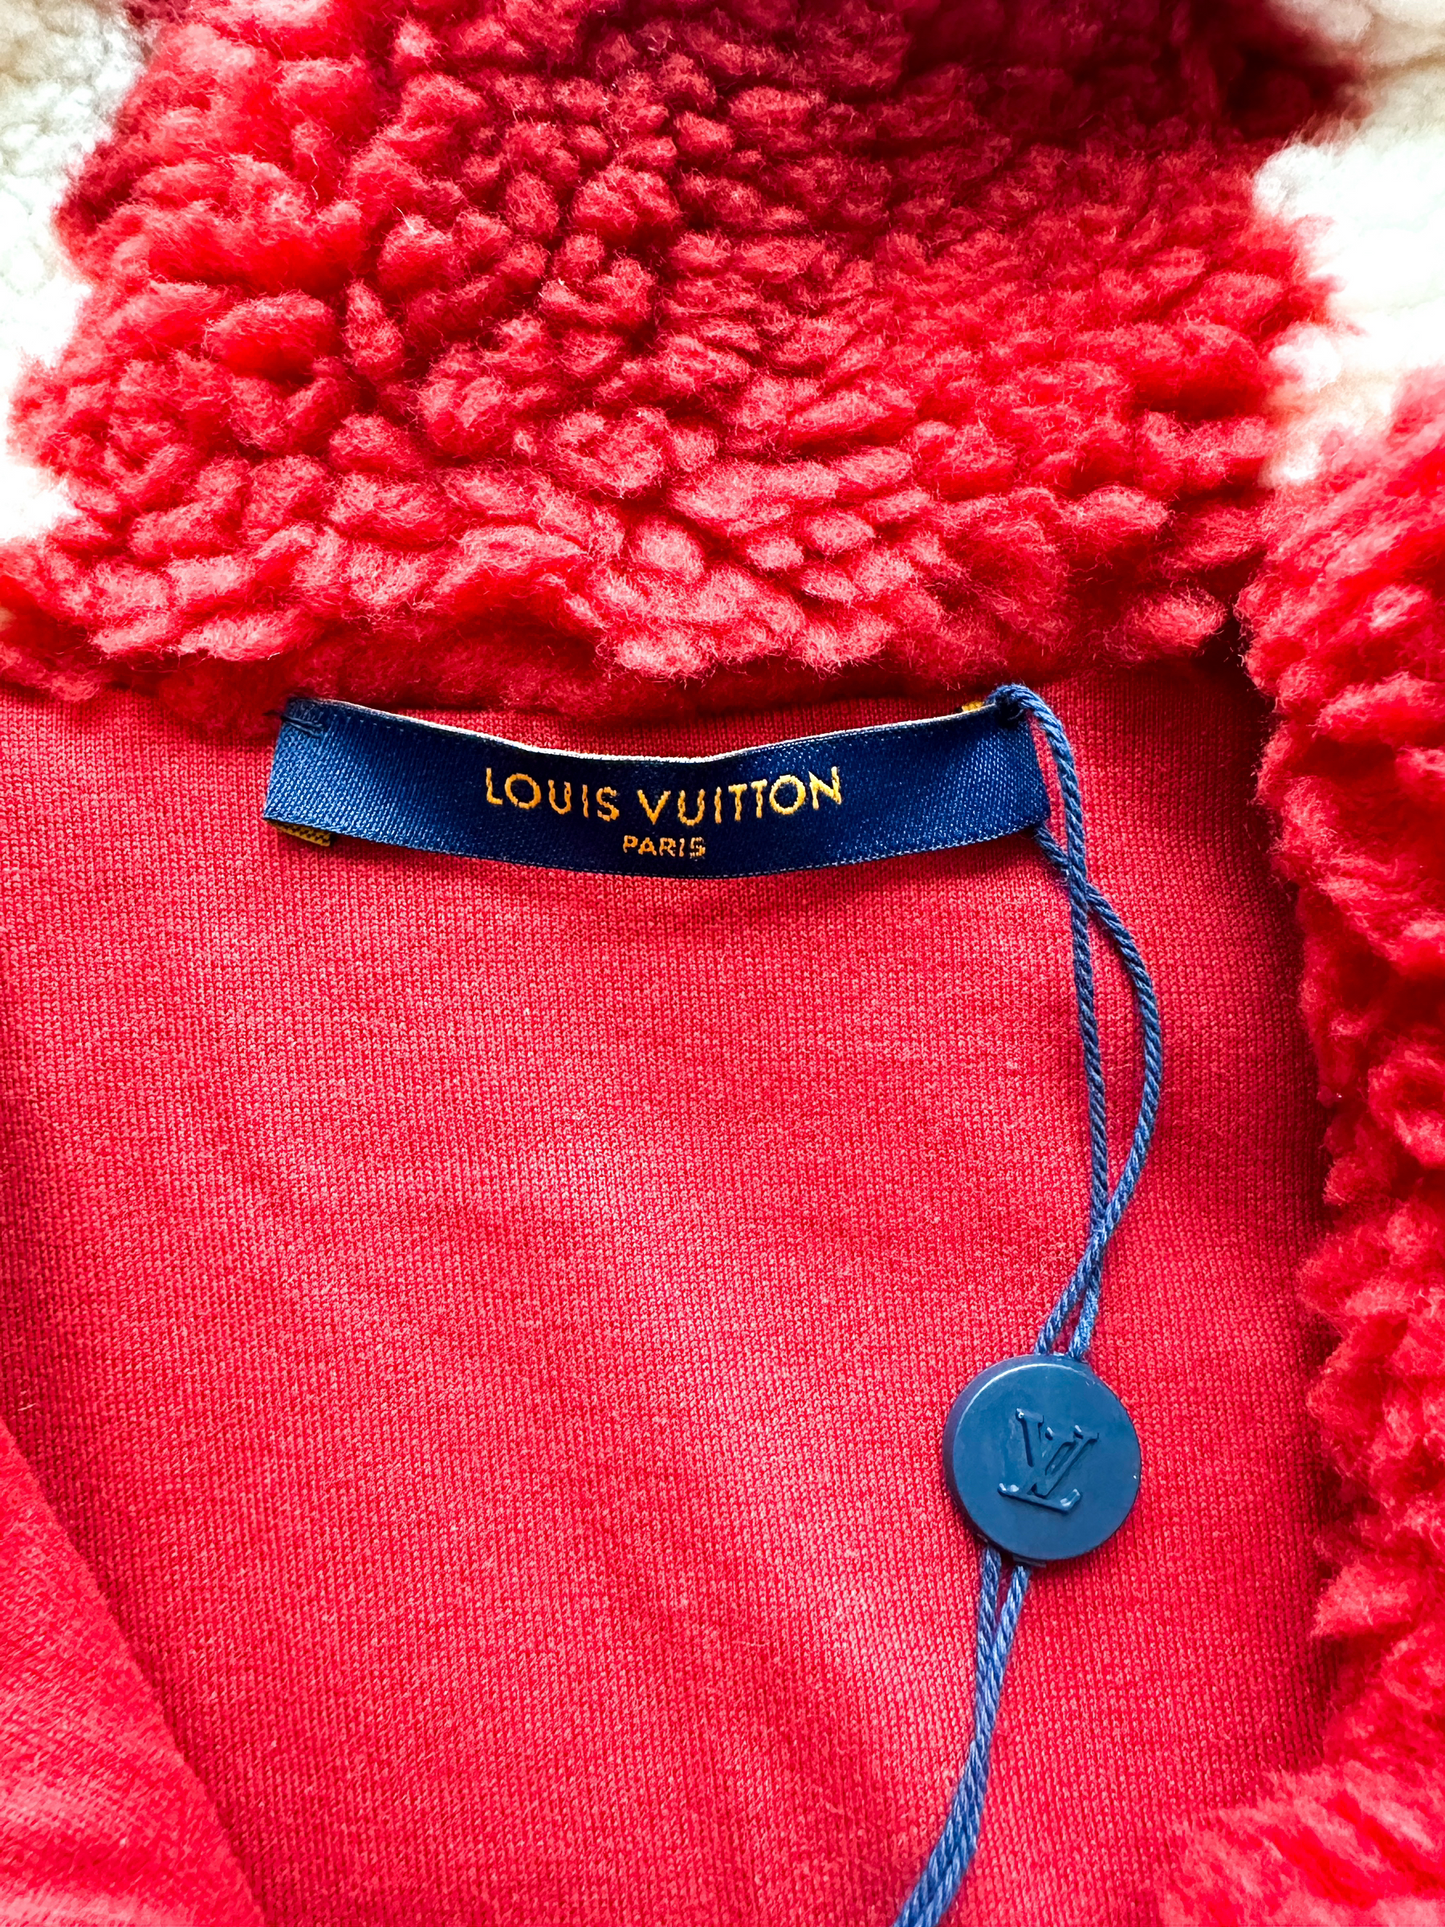 Louis Vuitton - Authenticated Jacket - Polyester Red Plain for Women, Very Good Condition